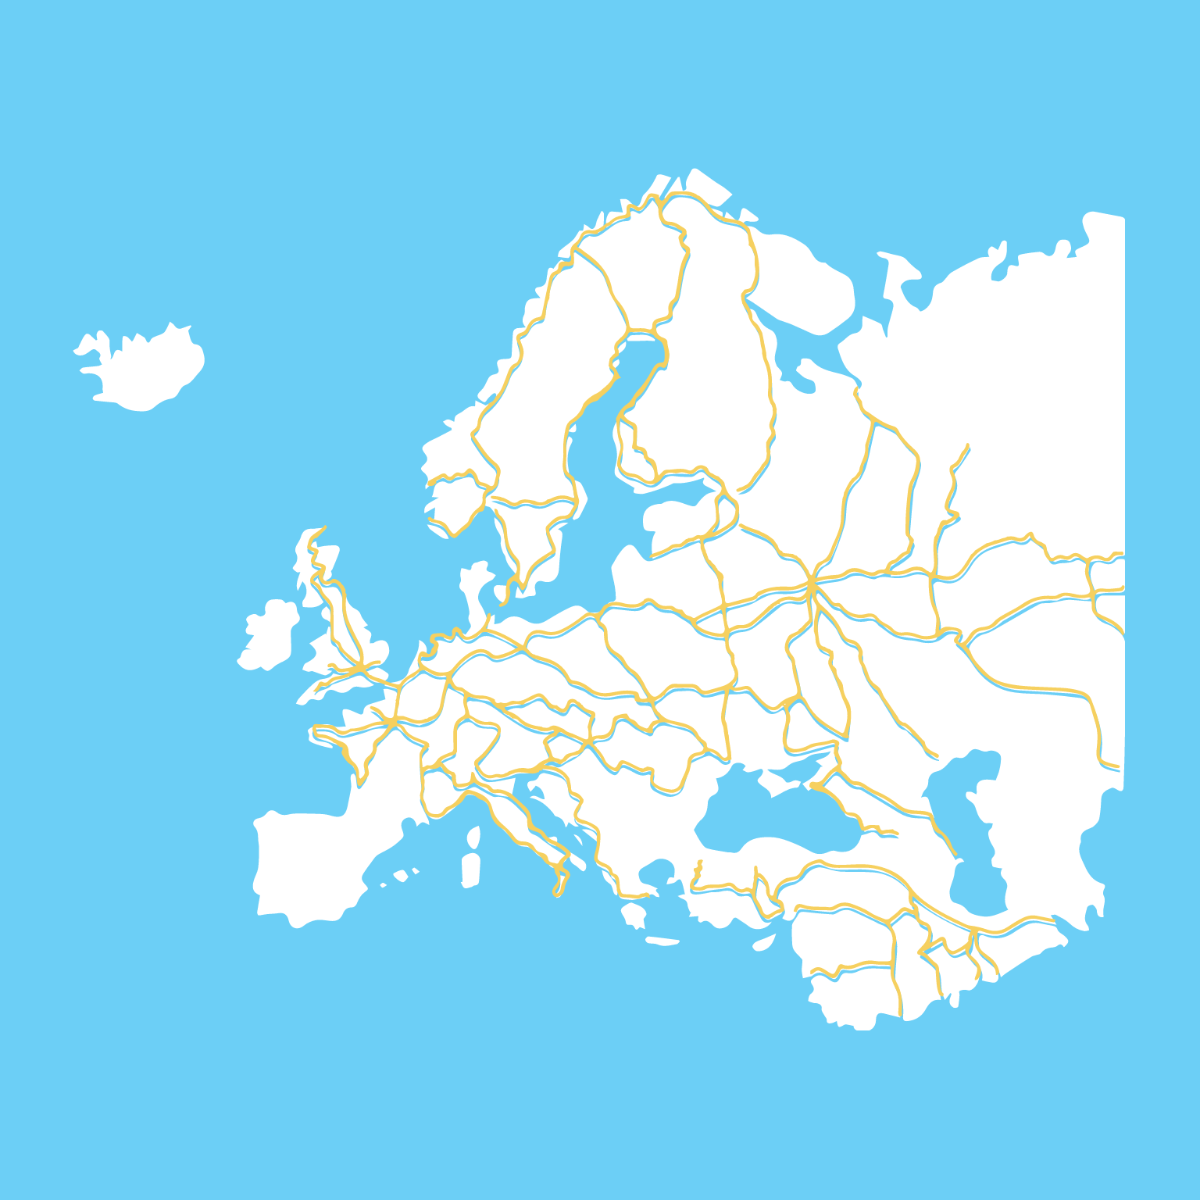 Free Europe Road Map Vector Template